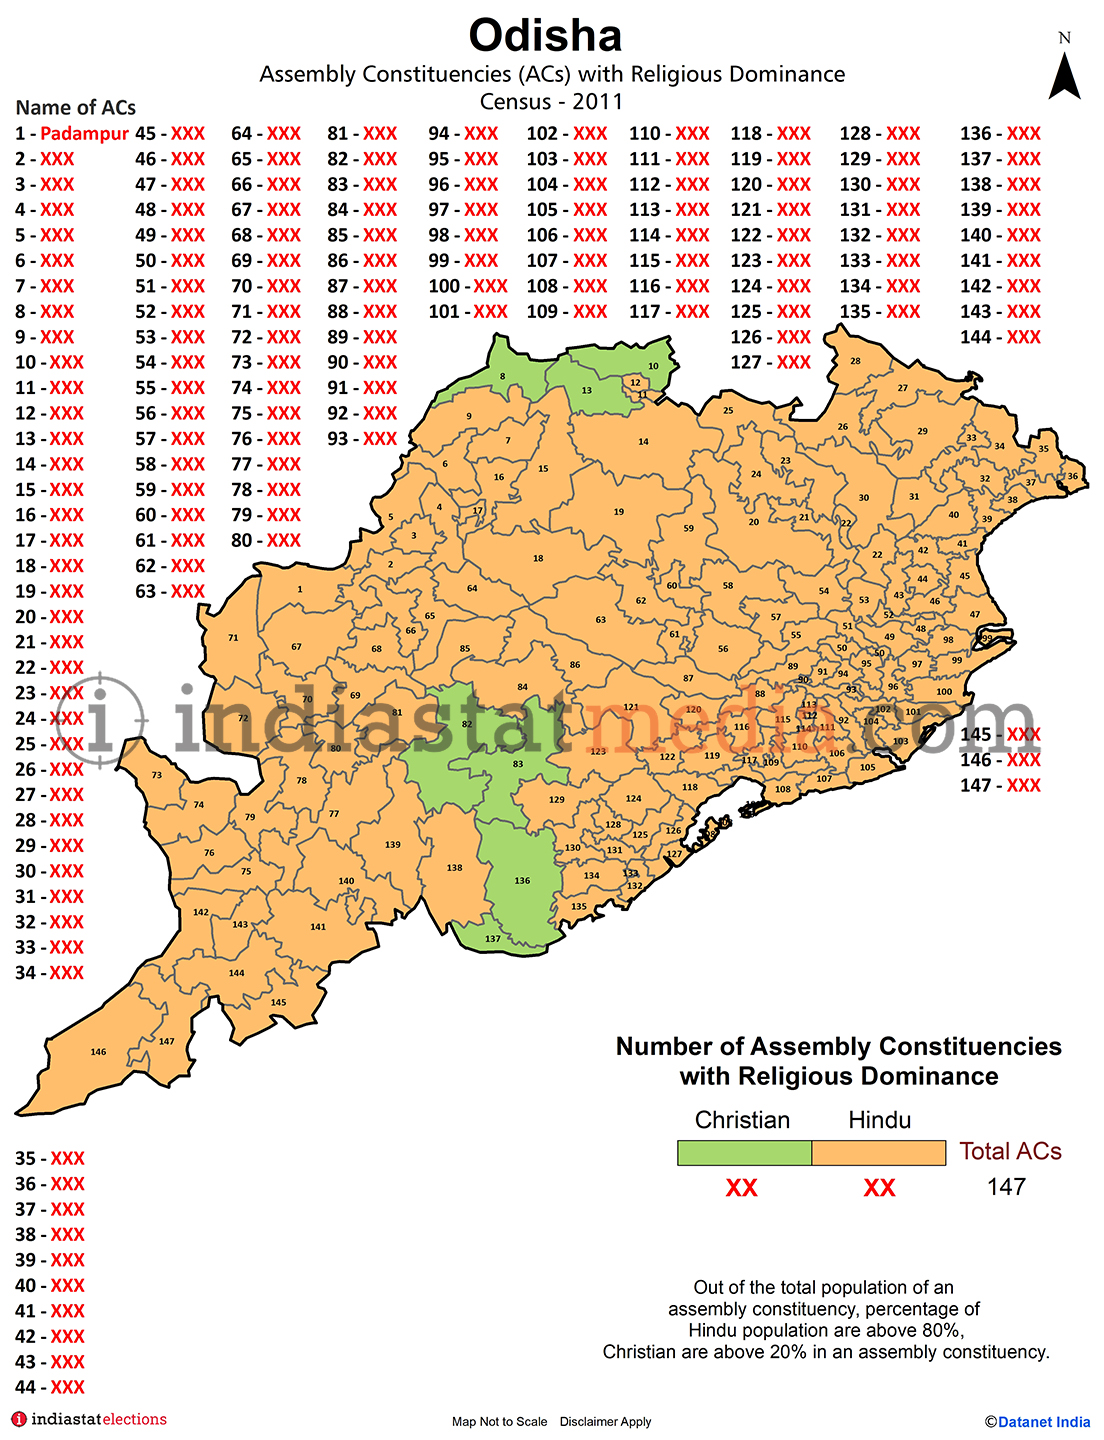 Assembly Constituencies (ACs) with Religious Dominance in Odisha - Census 2011